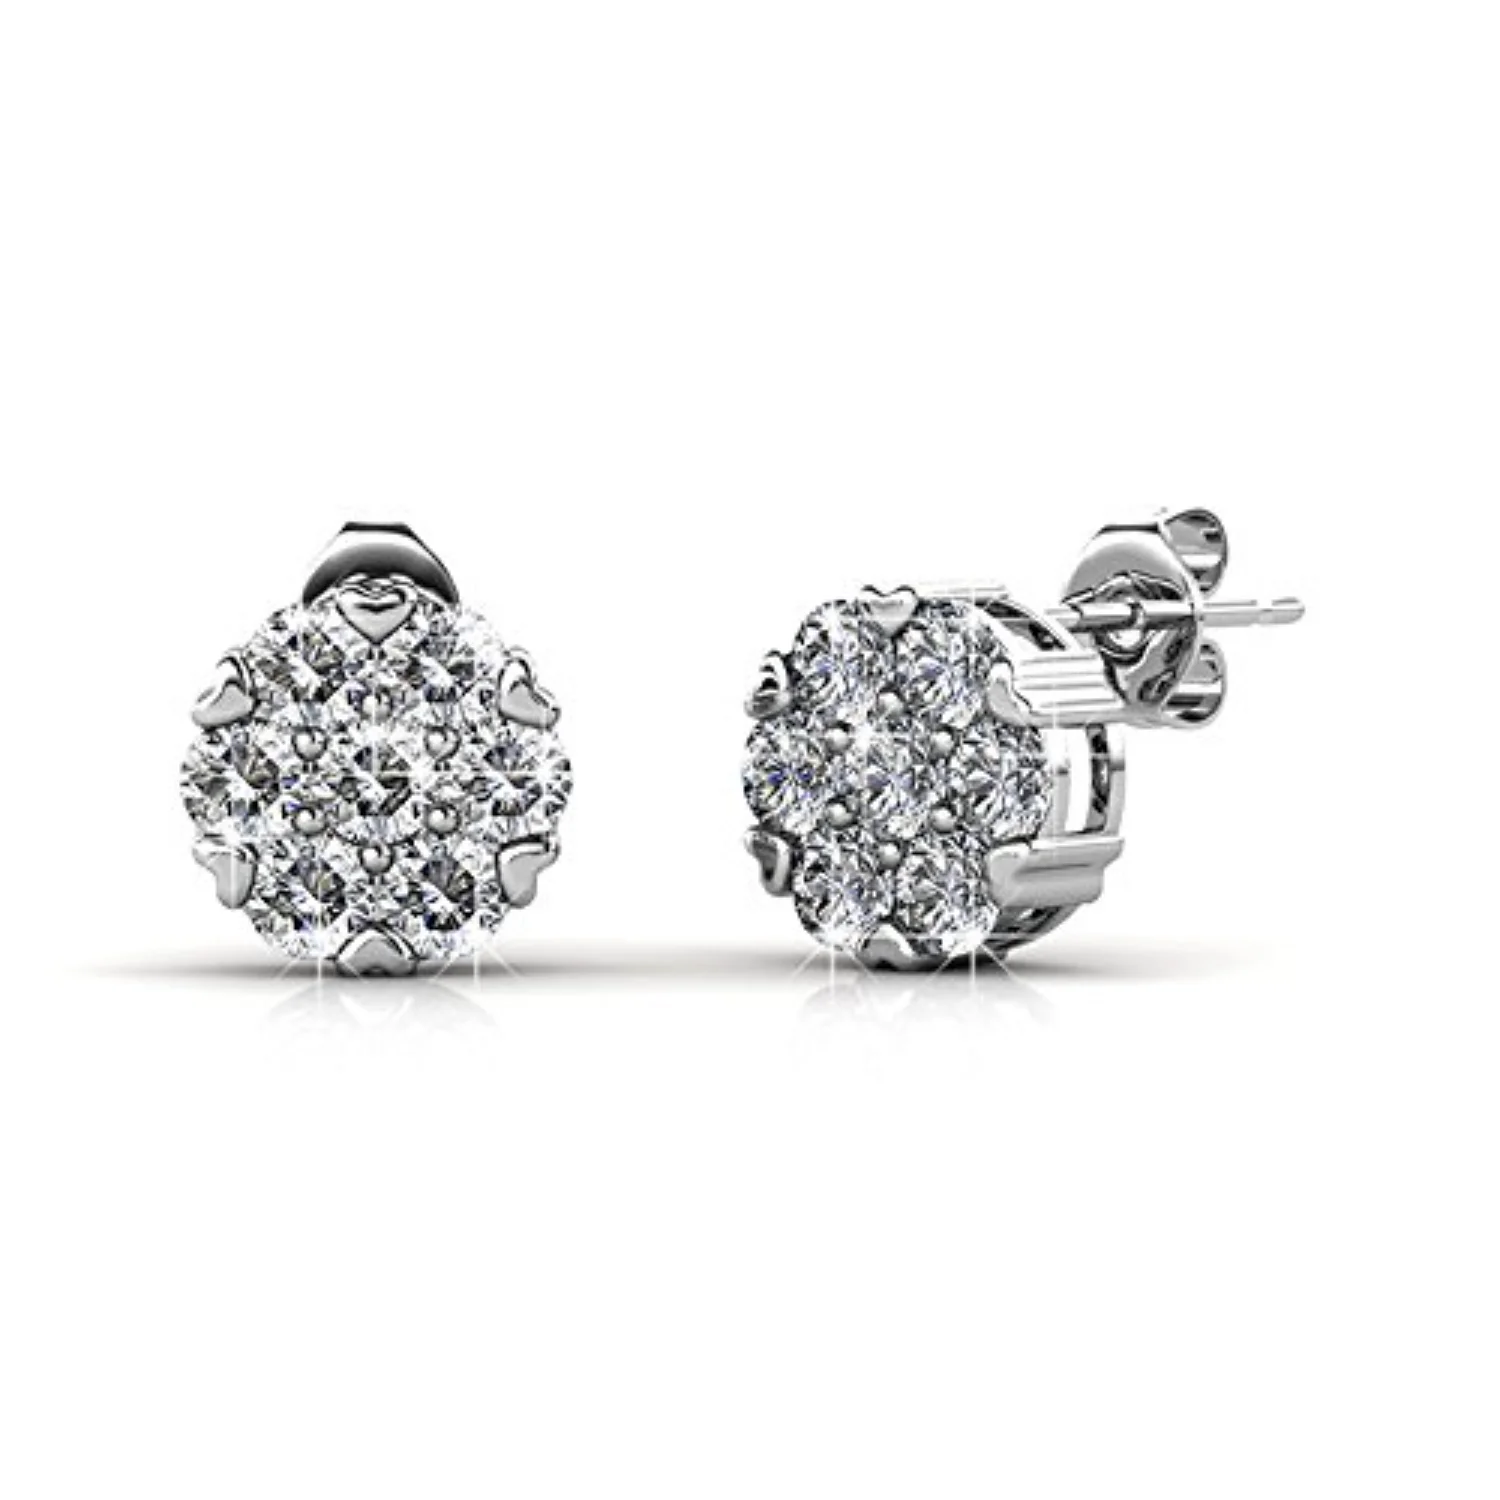 

Remy 18k White Gold Sparkling Pave Stud Earrings w/ Crystals, Sparkle Crystal Studs Earring Set for Women, Fashion Flower Clust